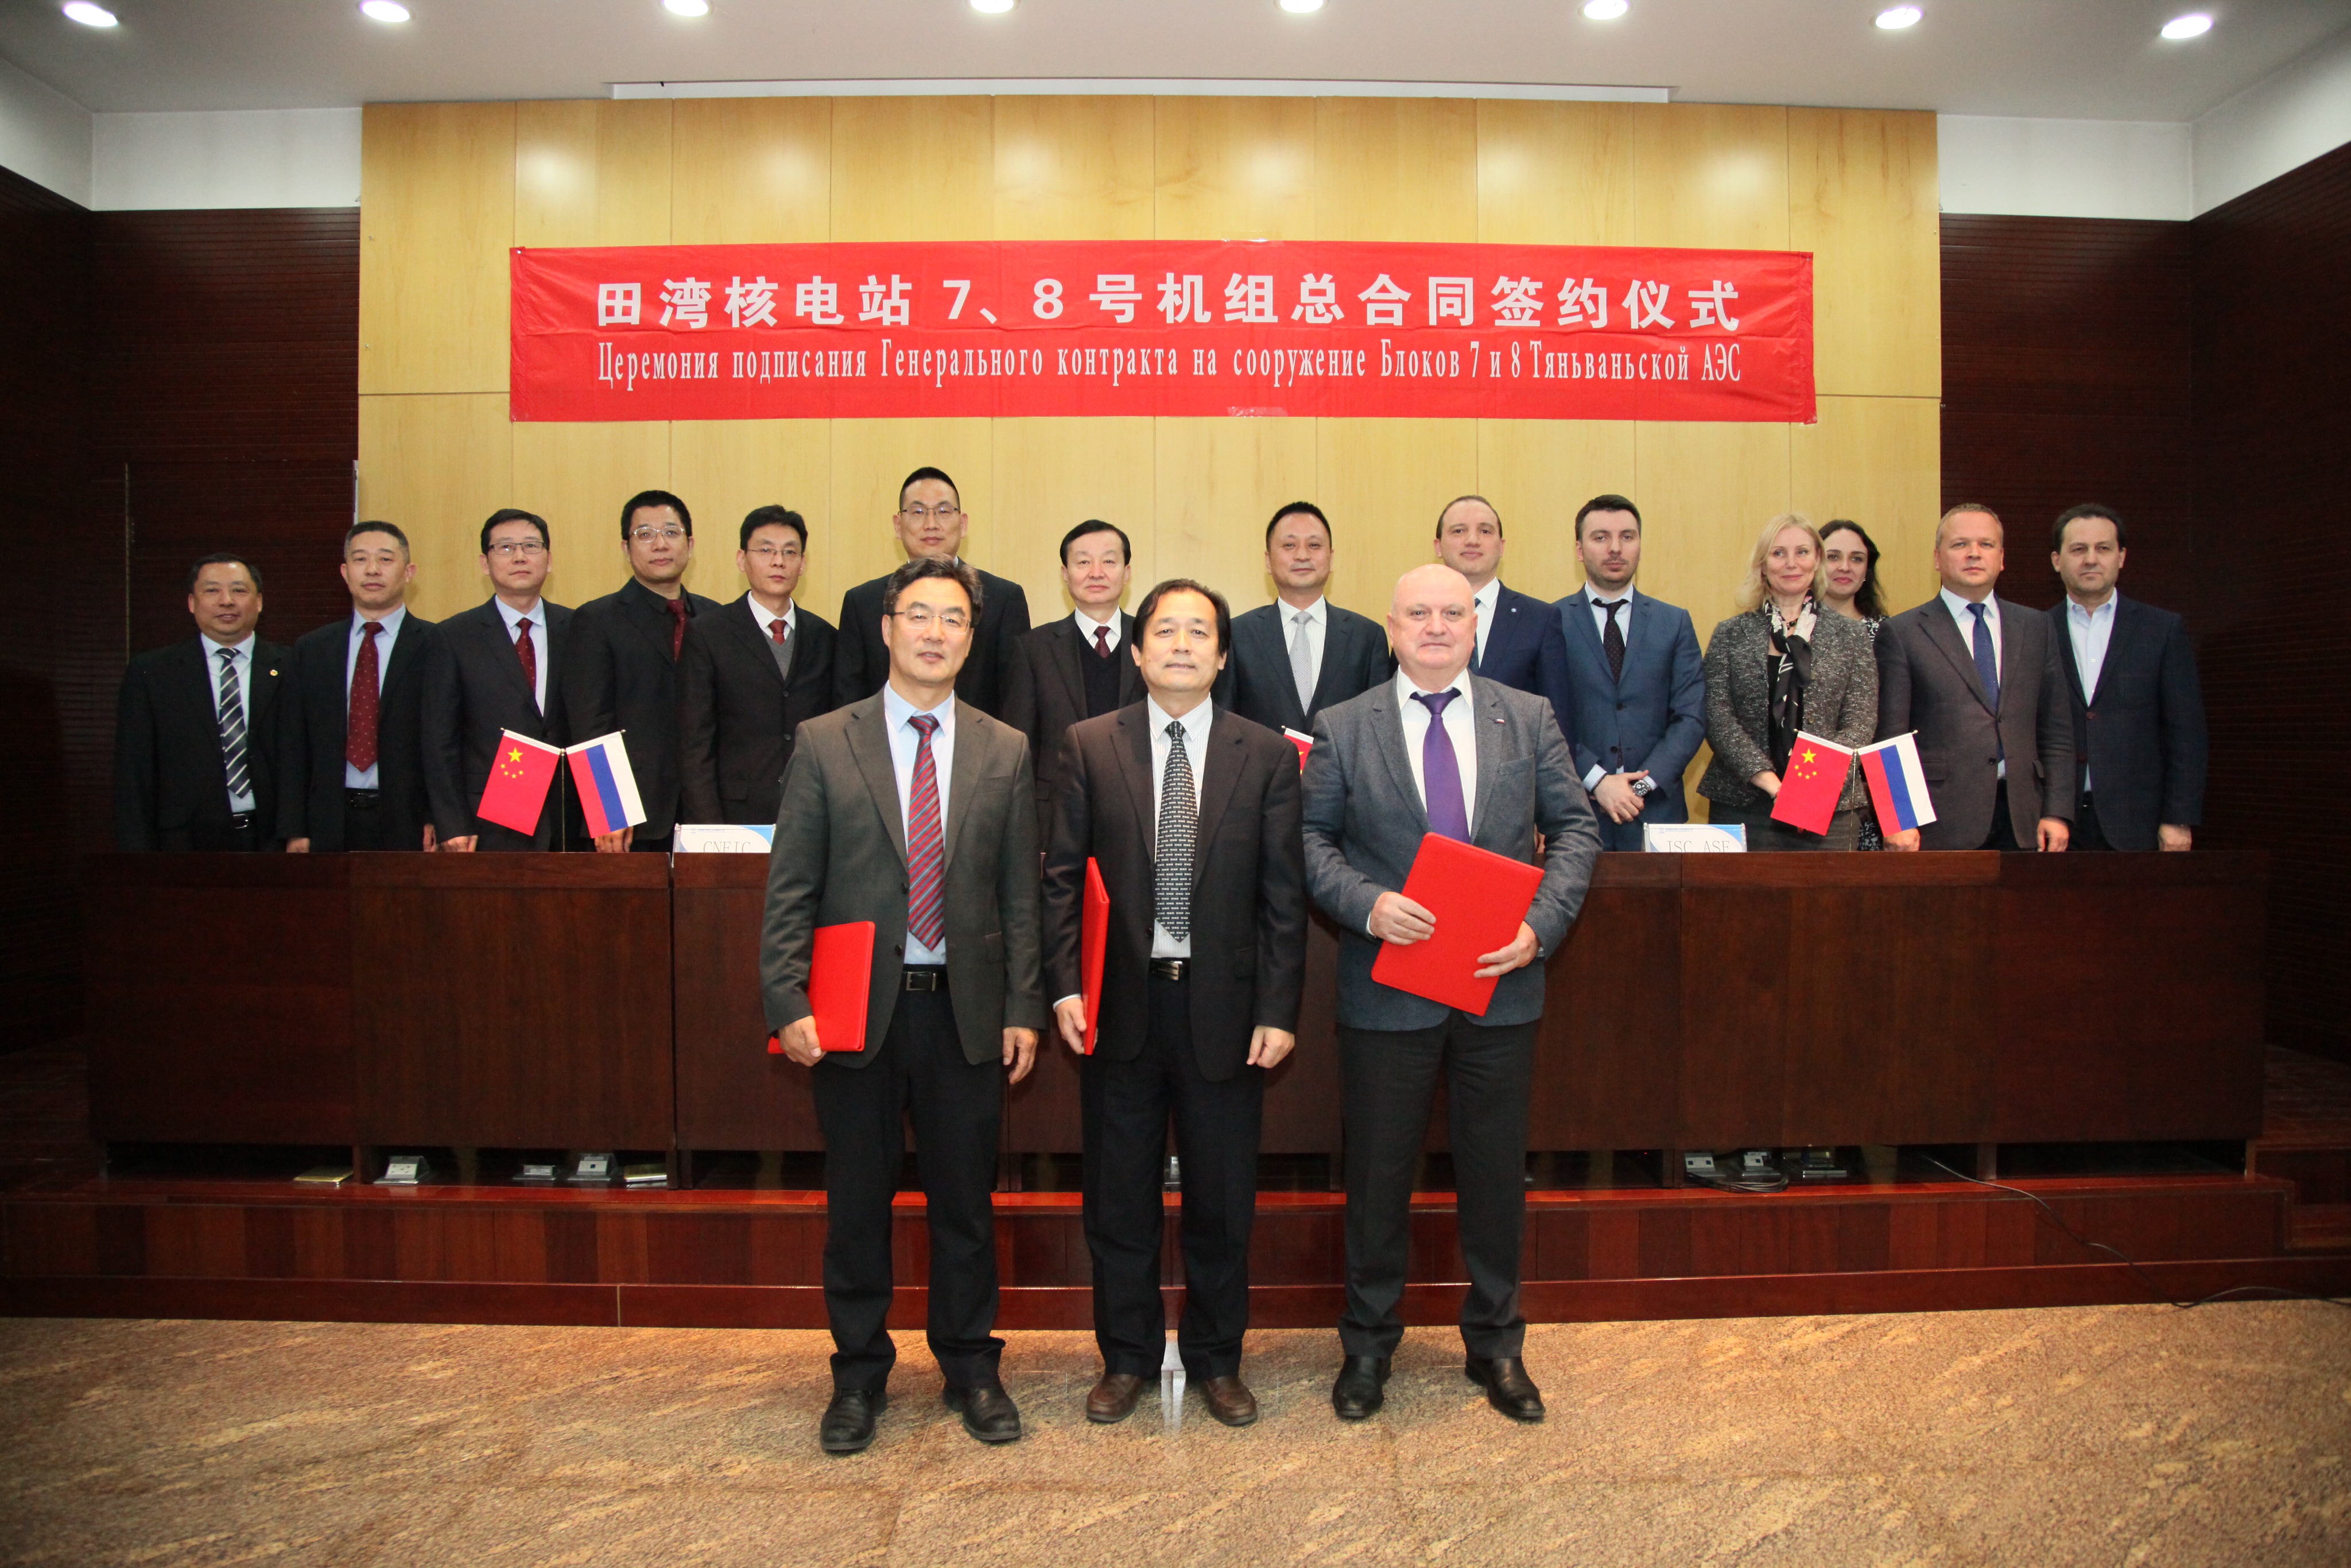 Russia and China signed the Executive contracts for the construction of Tianwan NPP and Xudabao NPP